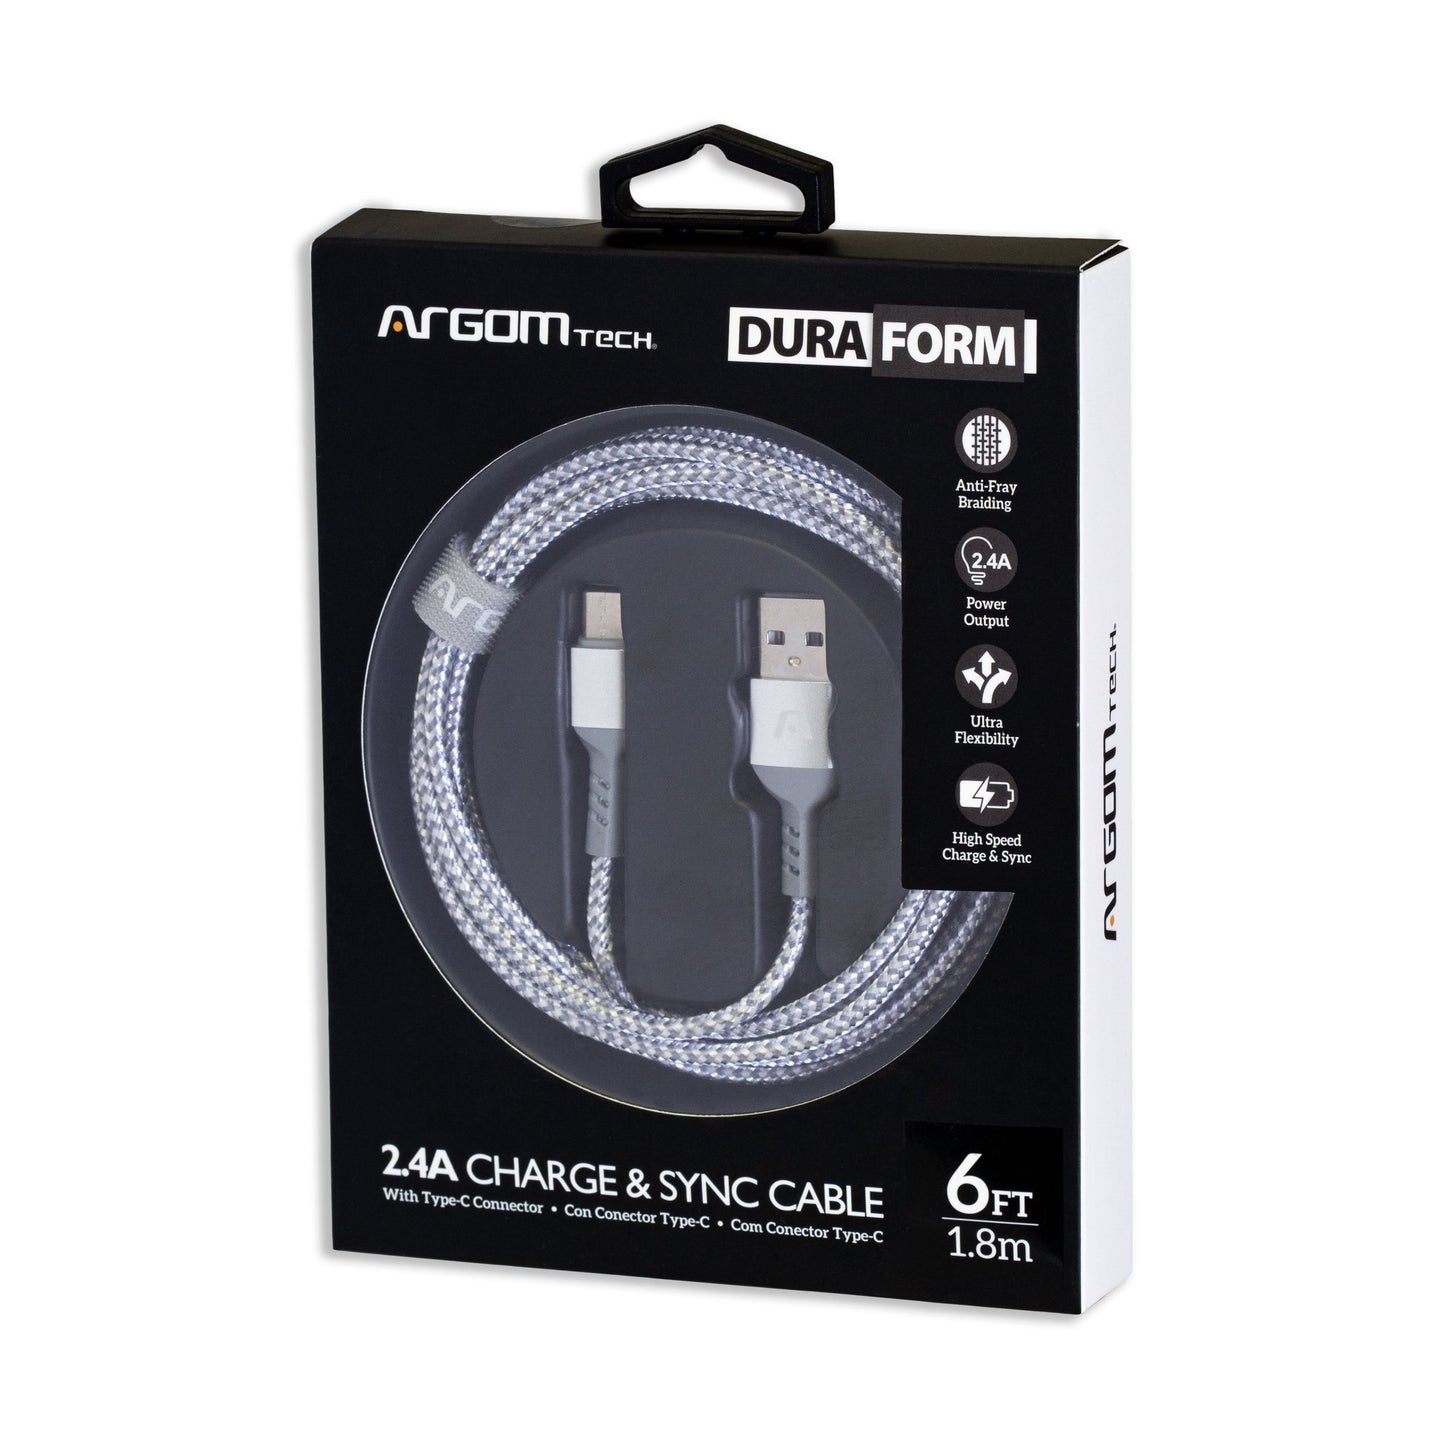 CABLE TYPE-C TO USB 2.0 NYLON BRAIDED DURA FORM